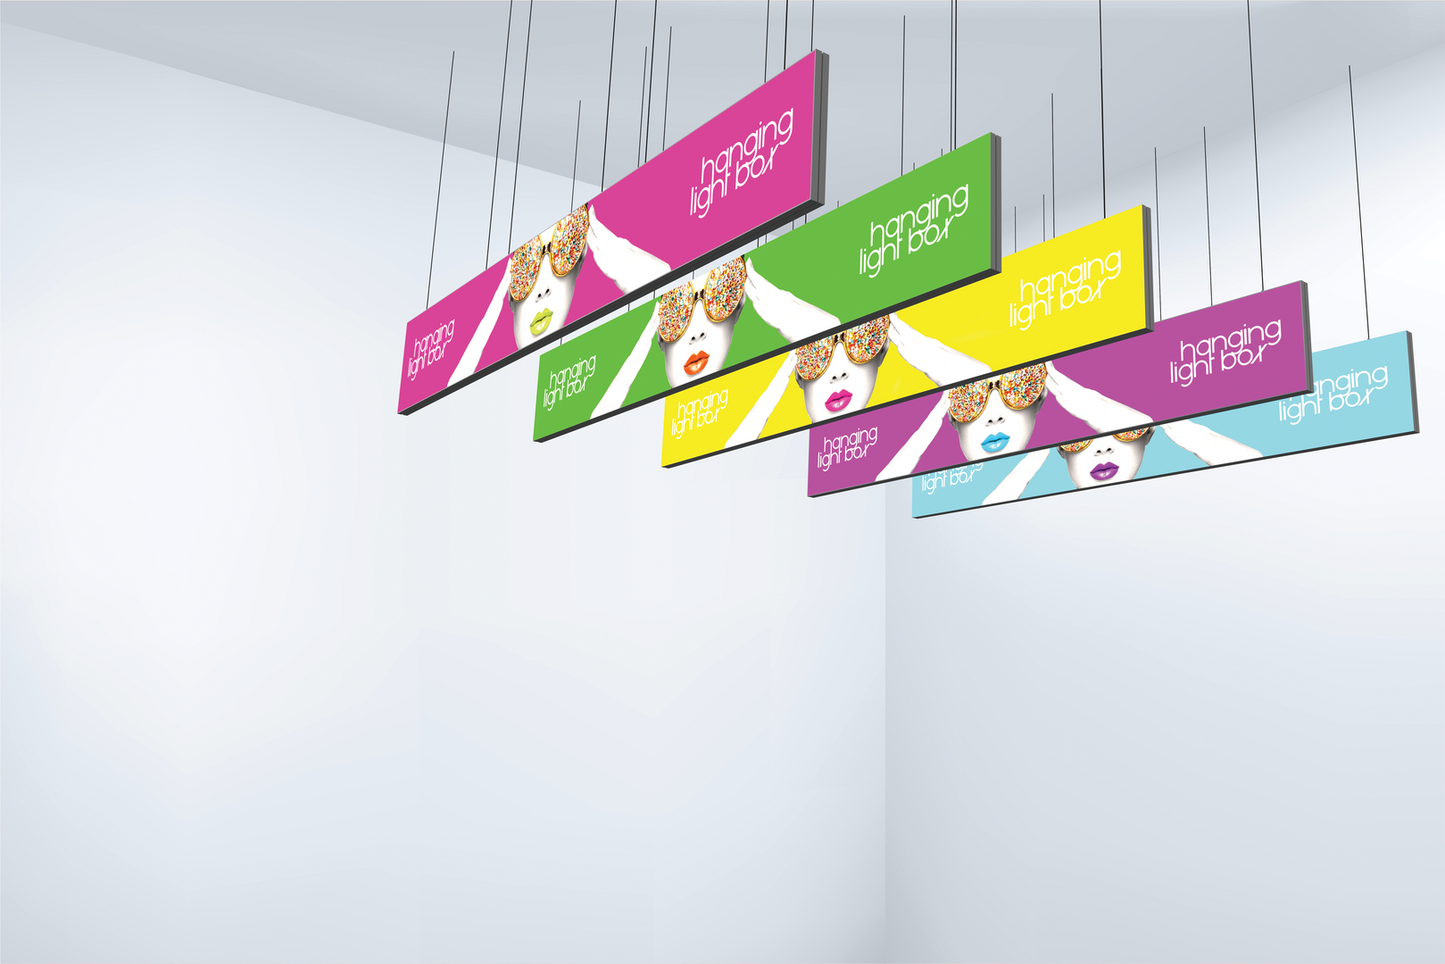 40ft x 3ft Vector Frame Hanging Light Box Double-Sided (Graphic Package)